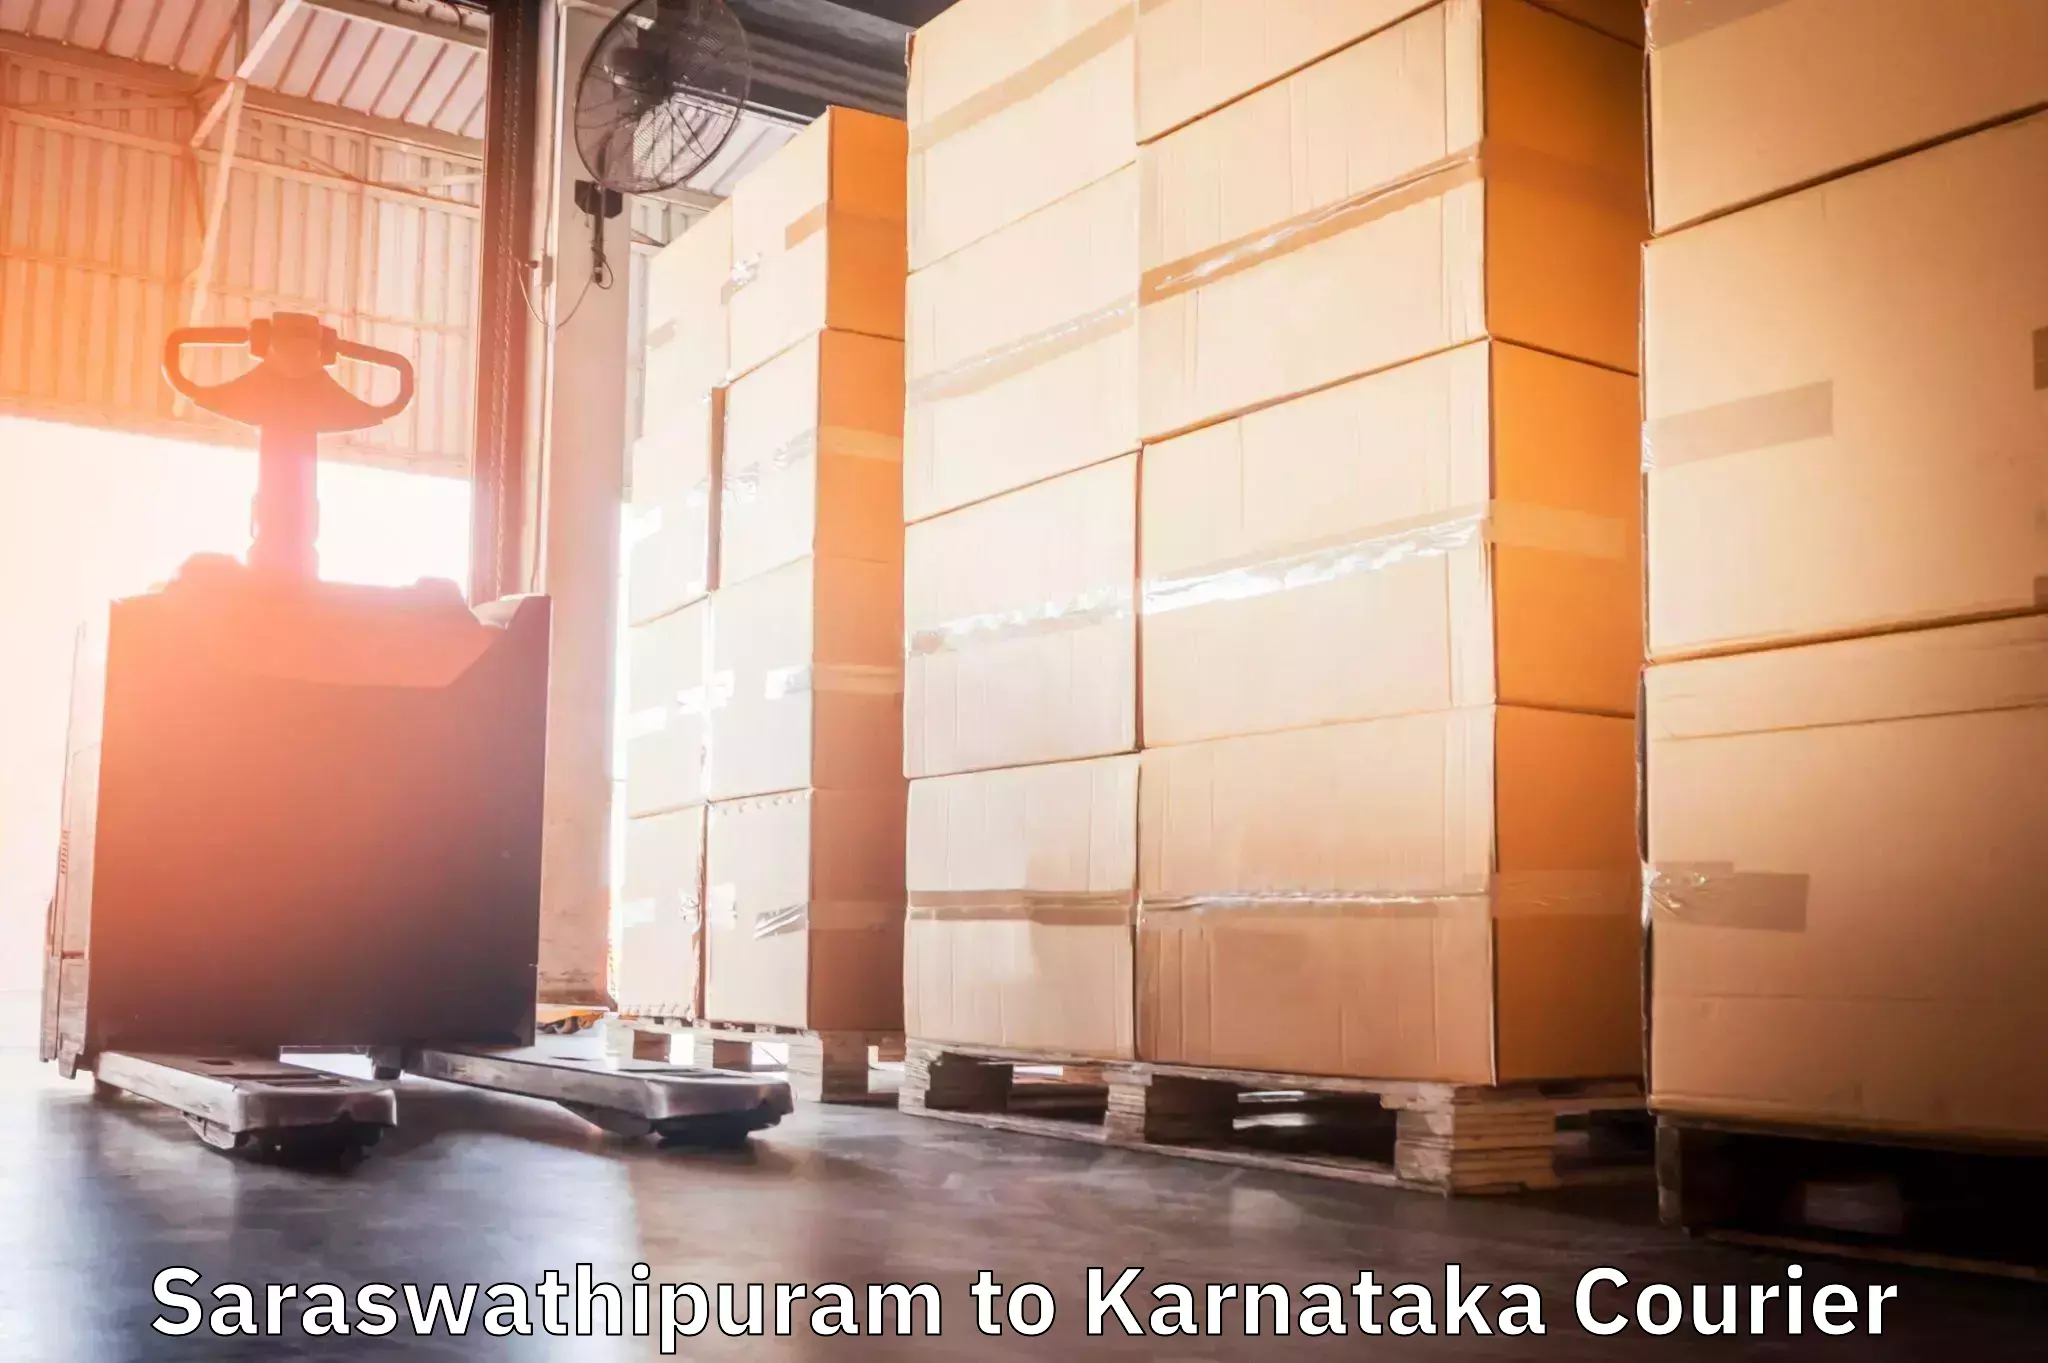 Local courier options Saraswathipuram to KLE Academy of Higher Education and Research Belagavi